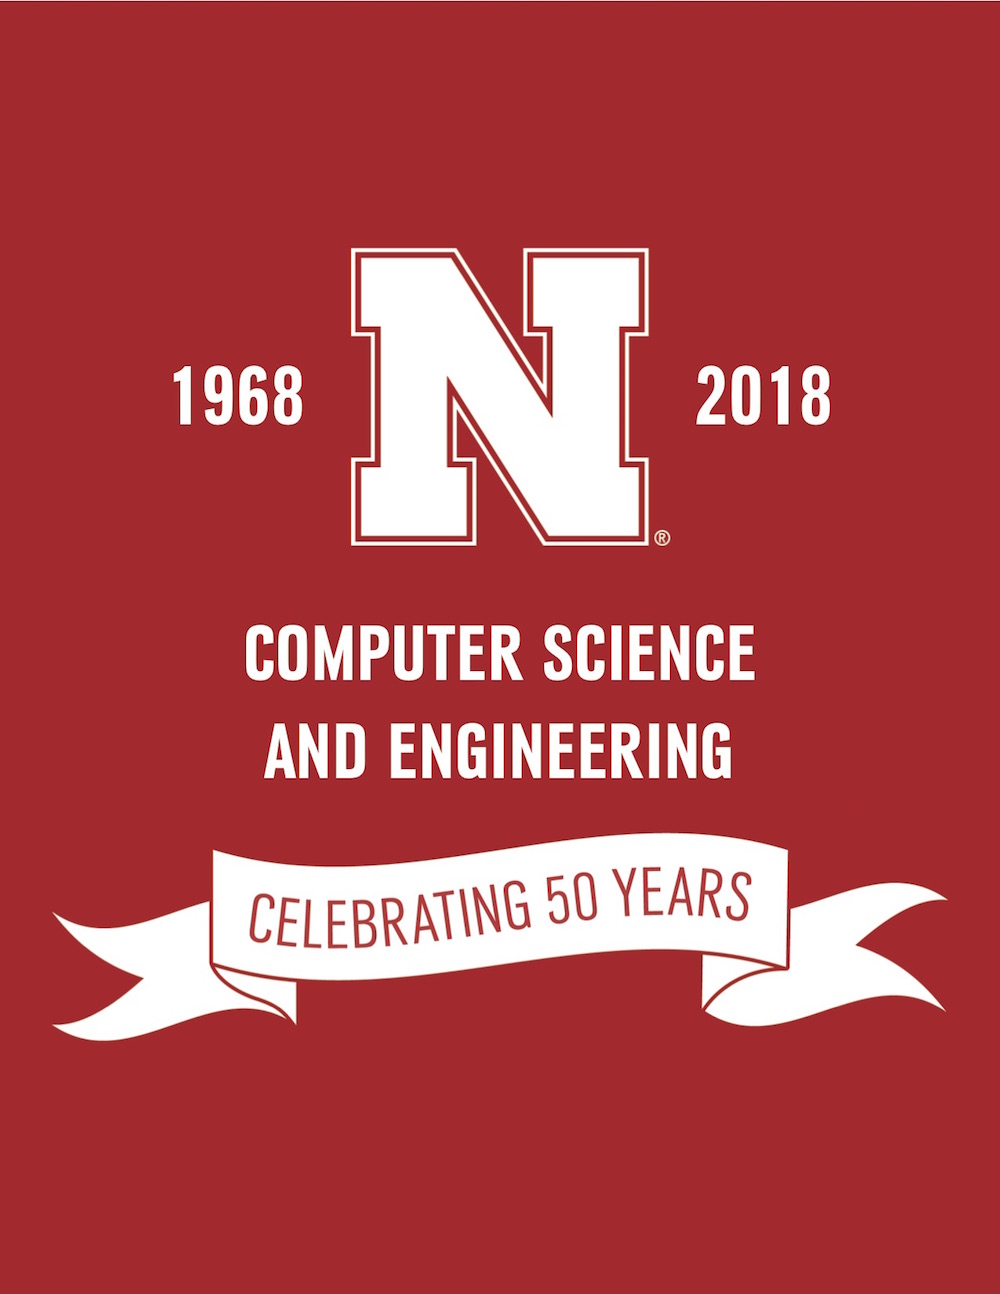 Computer Science and Engineering is celebrating 50 years of computing excellence.